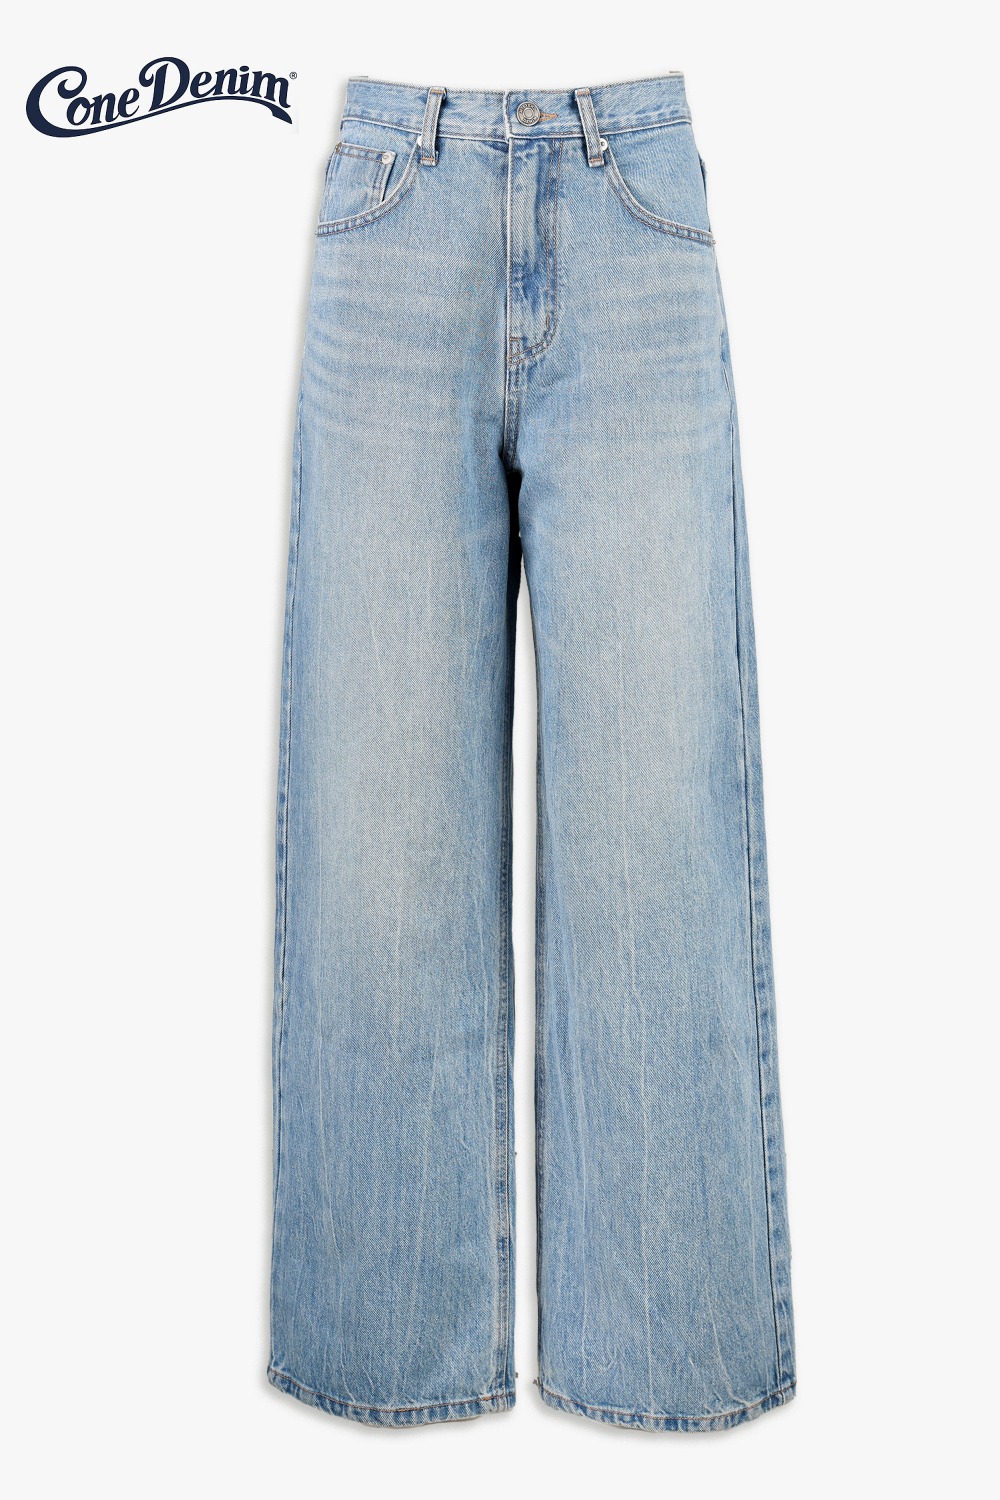 #005 Washed Wide Cone Denim (LIGHT BLUE) From U.S.A